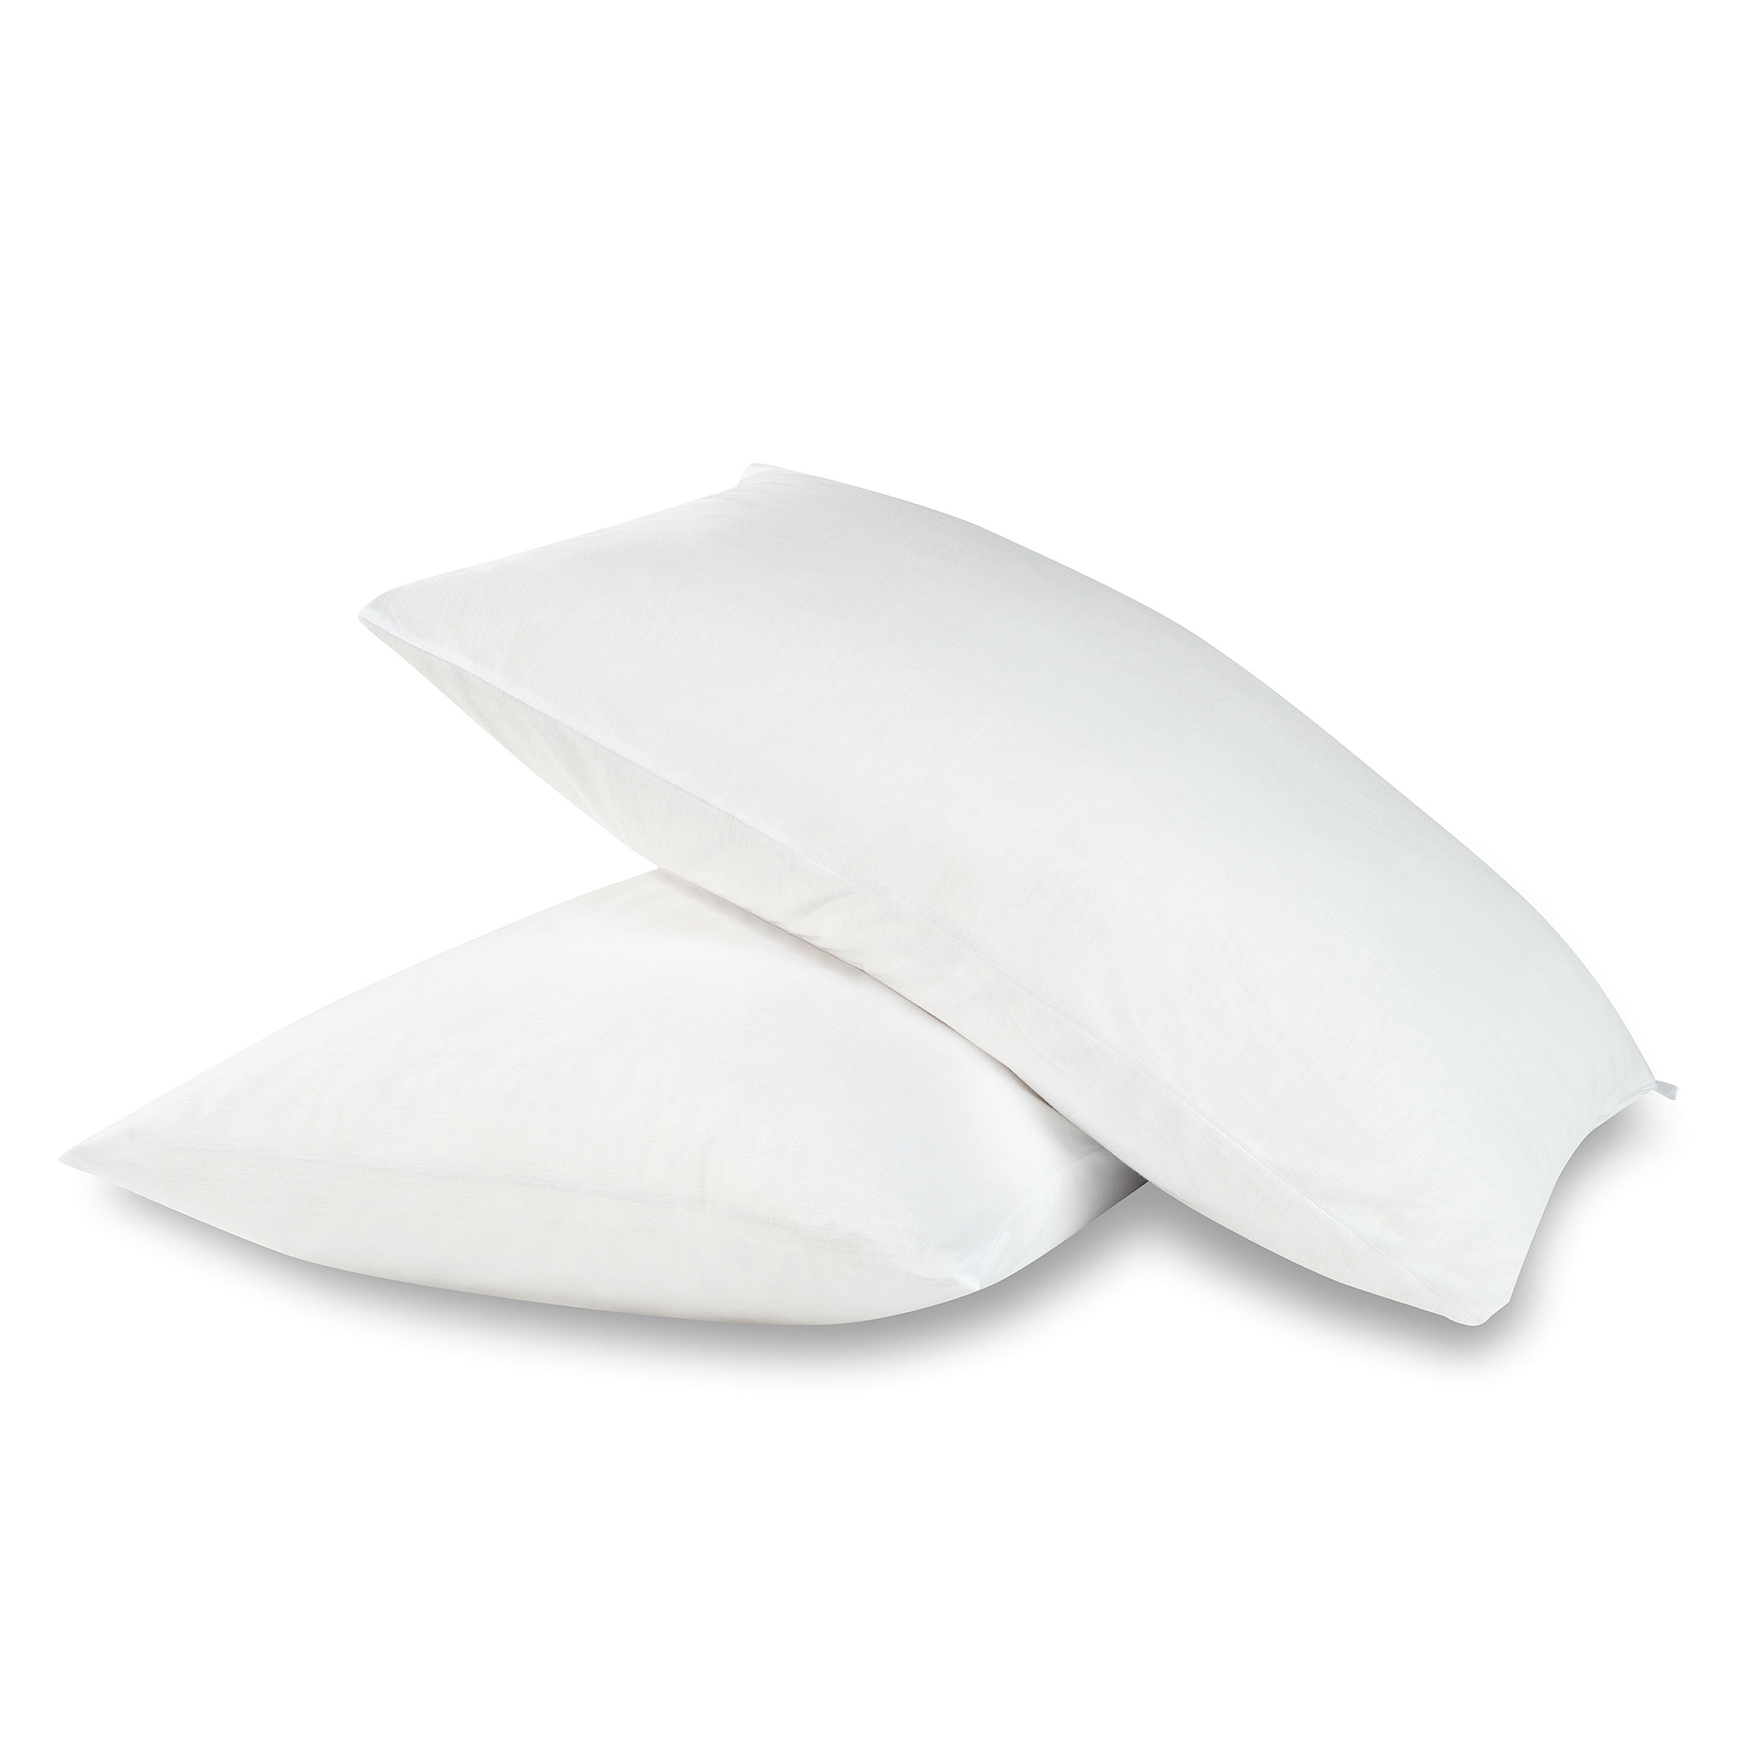 All-In-One Circular Flow Breathable & Cooling Pillow Protector 2-Pack, Standard/Queen, 